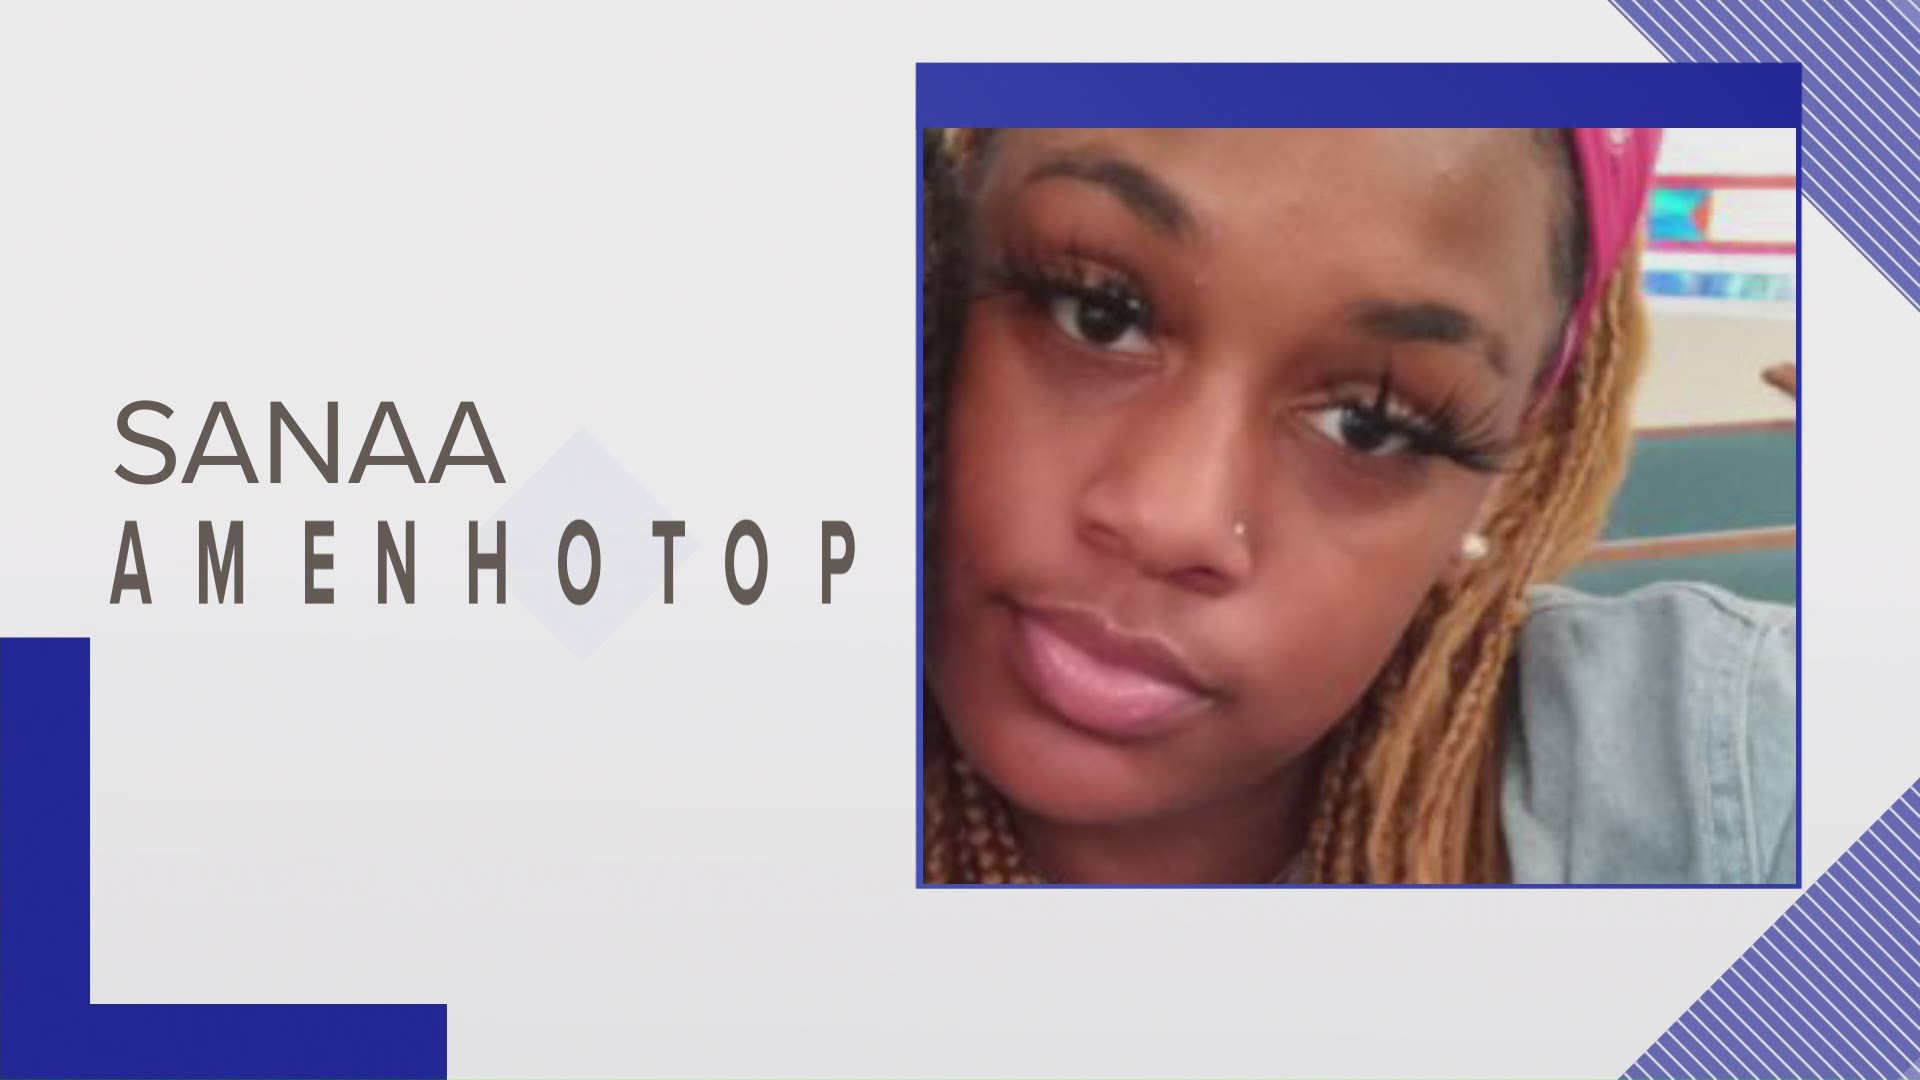 Deputies say 15-year-old Sanaa Amenhotop was last seen leaving her residence in northeast Columbia on April 5, and has not been heard from since.